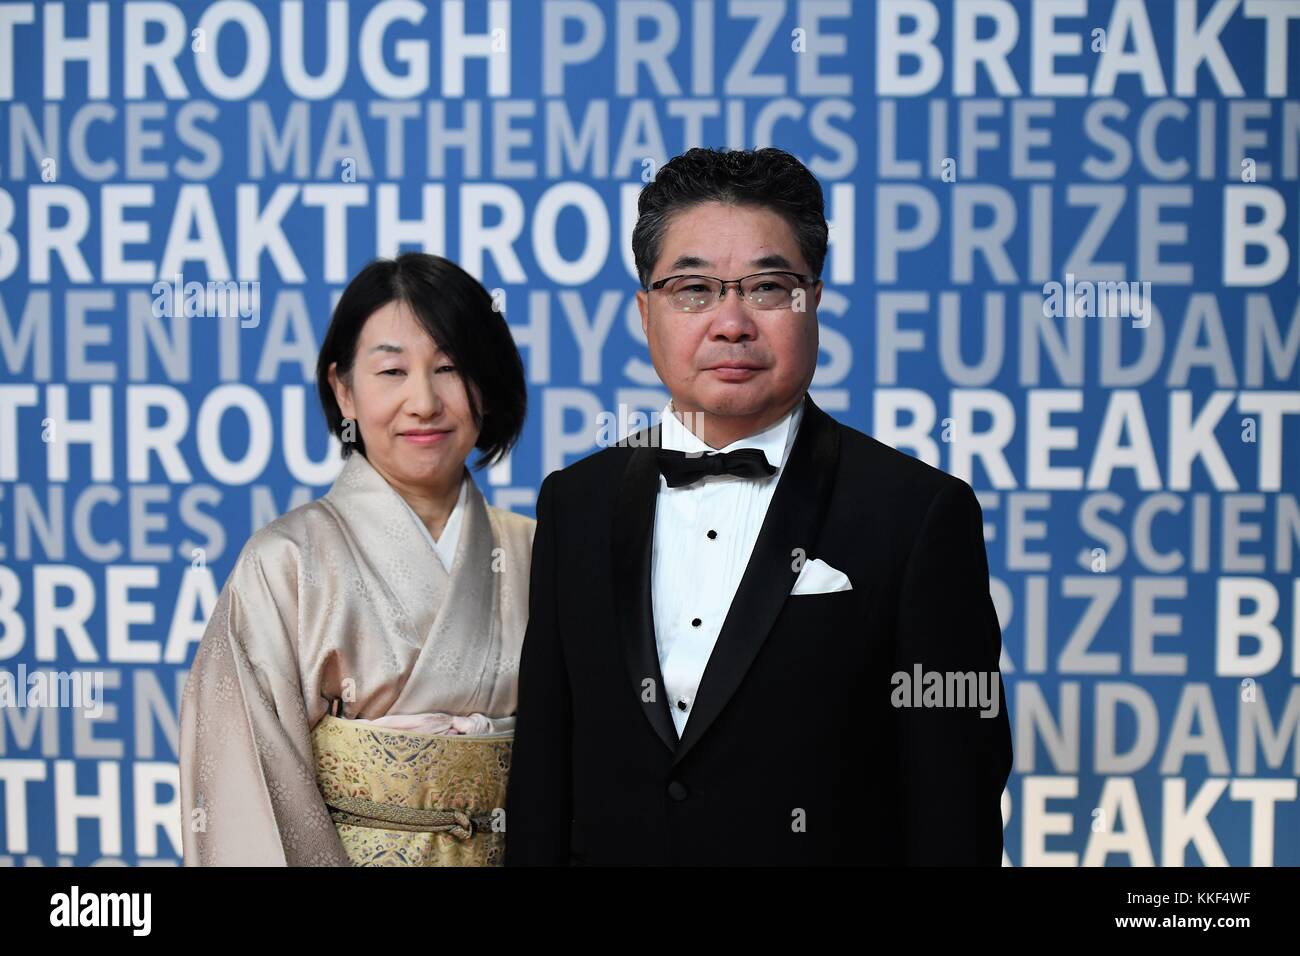 (171204) -- SAN FRANCISCO, Dec. 4, 2017 (Xinhua) -- Kazutoshi Mori from Kyoto University (R) attends the awarding ceremony of the 2018 Breakthrough Prize in San Francisco, the United States, on Dec. 3, 2017. The Breakthrough Prize Foundation on Sunday announced here the winners of the 2018 Breakthrough Prizes in fundamental physics, life sciences and mathematics, together with several other prizes to encourage young scientists. The prize in life sciences went to Joanne Chory from the Salk Institute for Biological Studies and Howard Hughes Medical Institute, Don W. Cleveland from the Ludwig Ins Stock Photo